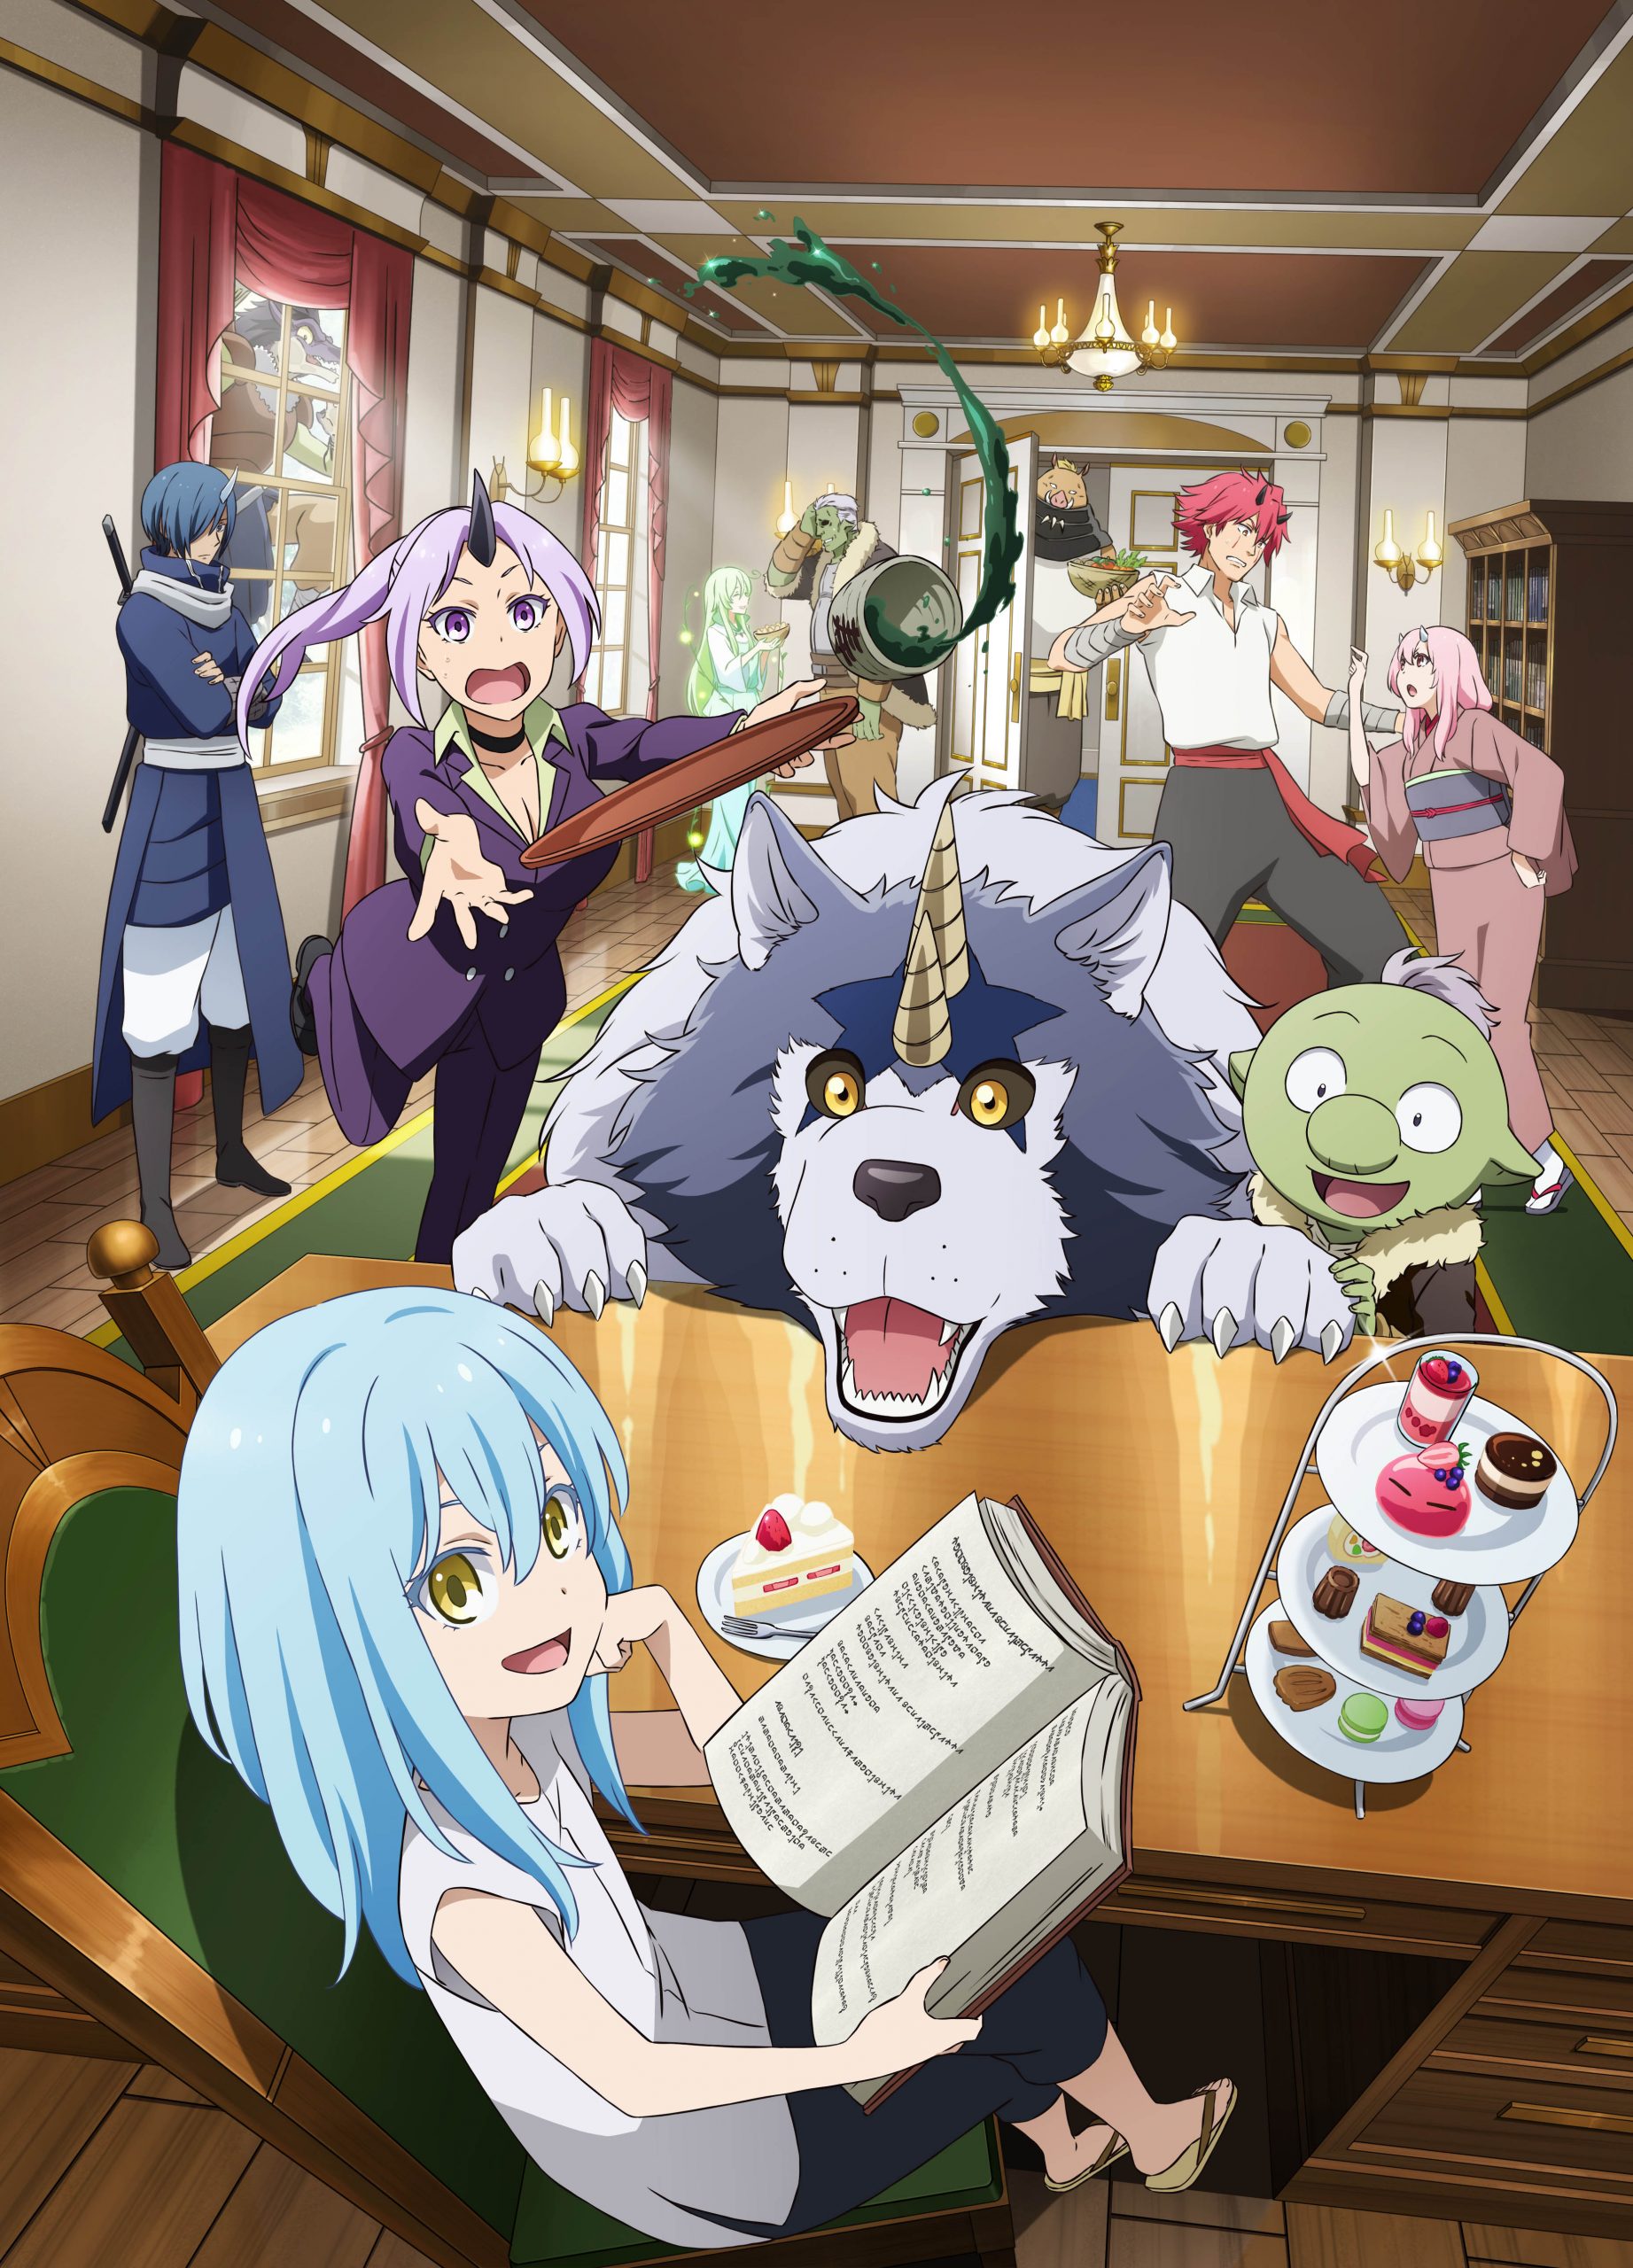 The Time I Got Reincarnated as a Slime The Movie Review